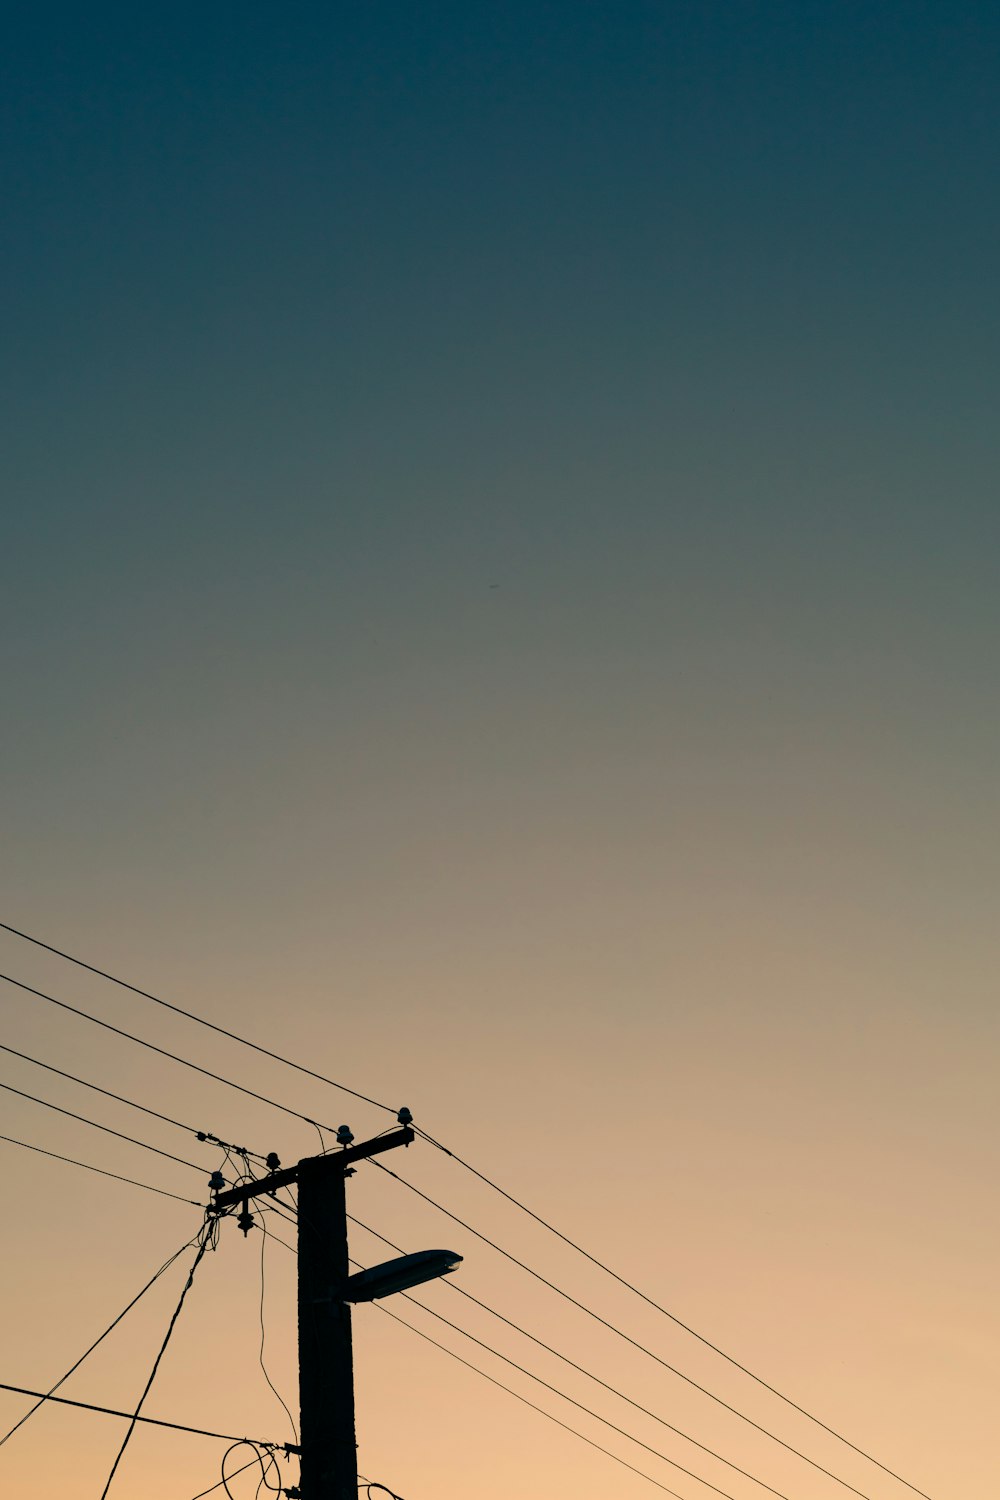 a telephone pole and power lines against a blue sky